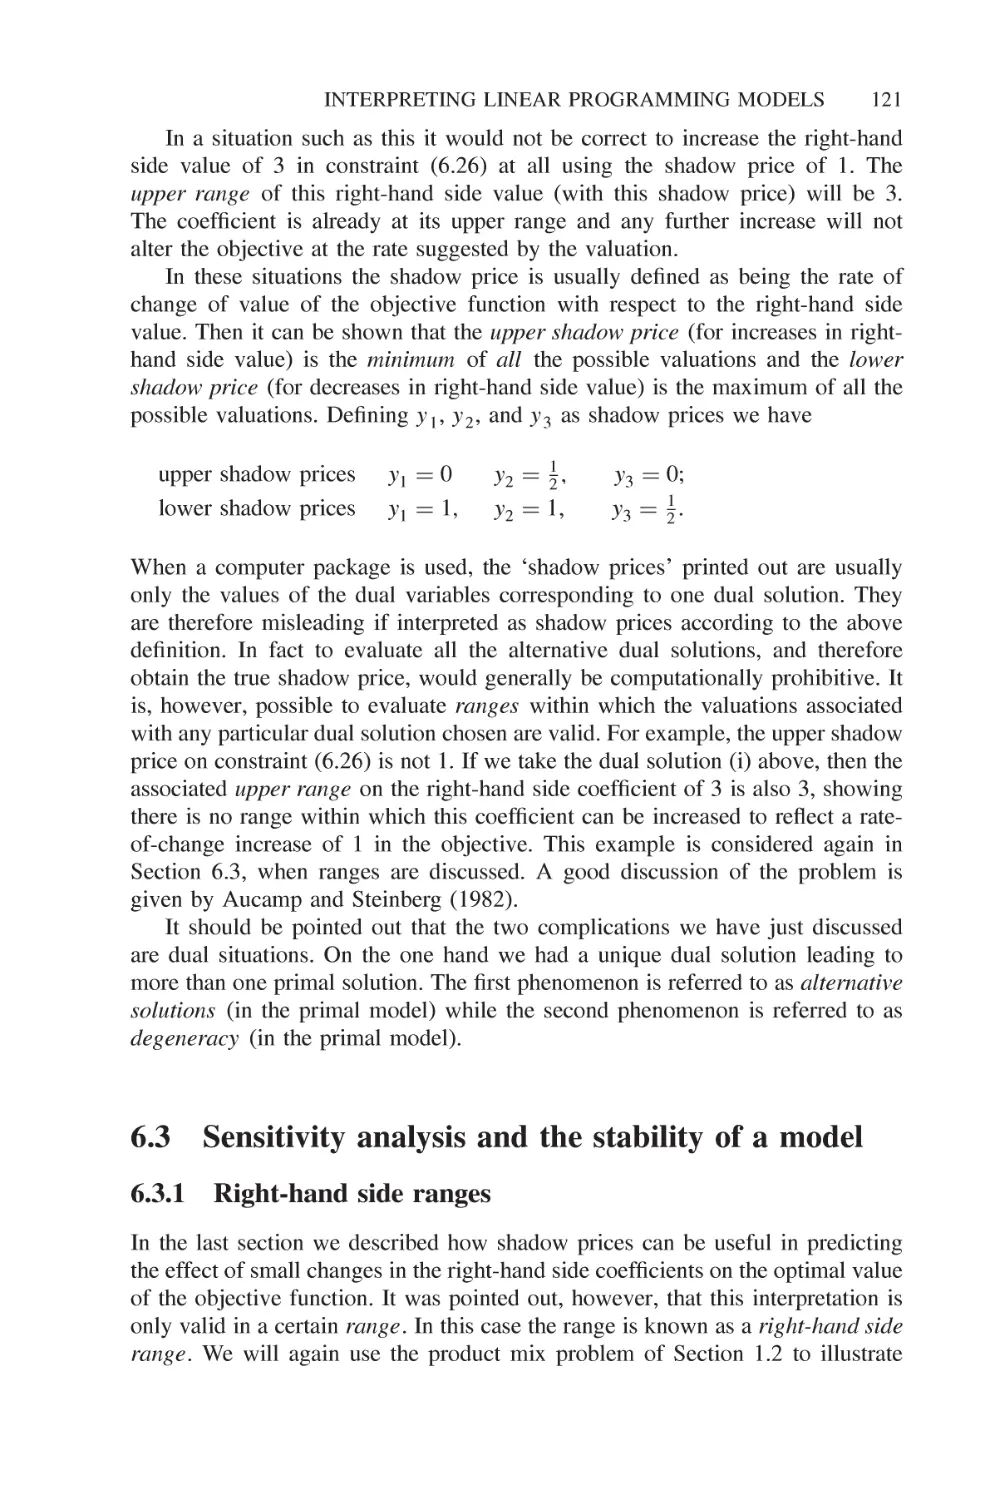 6.3 Sensitivity analysis and the stability of a model